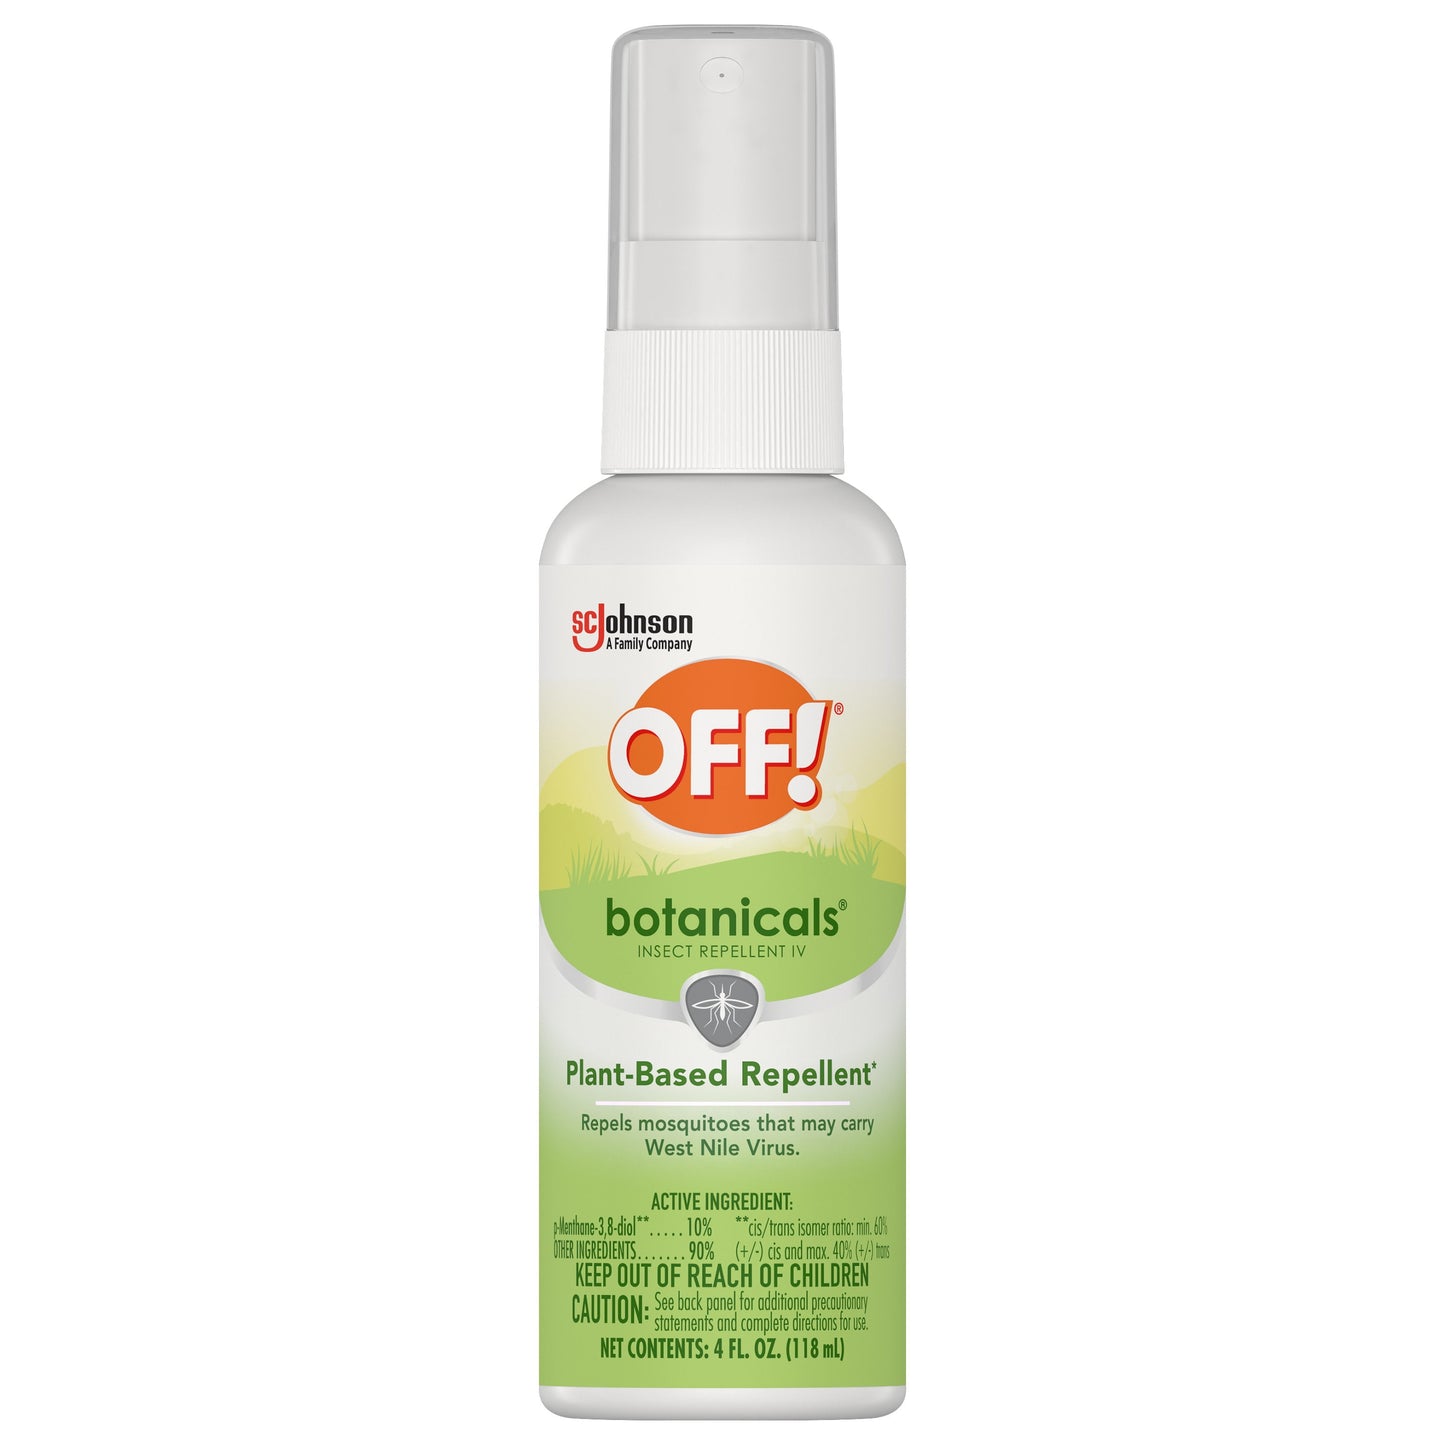 OFF!® Botanicals® Insect Repellent Spritz, Mosquito Repellent for Everyday Use, 4 fl oz.